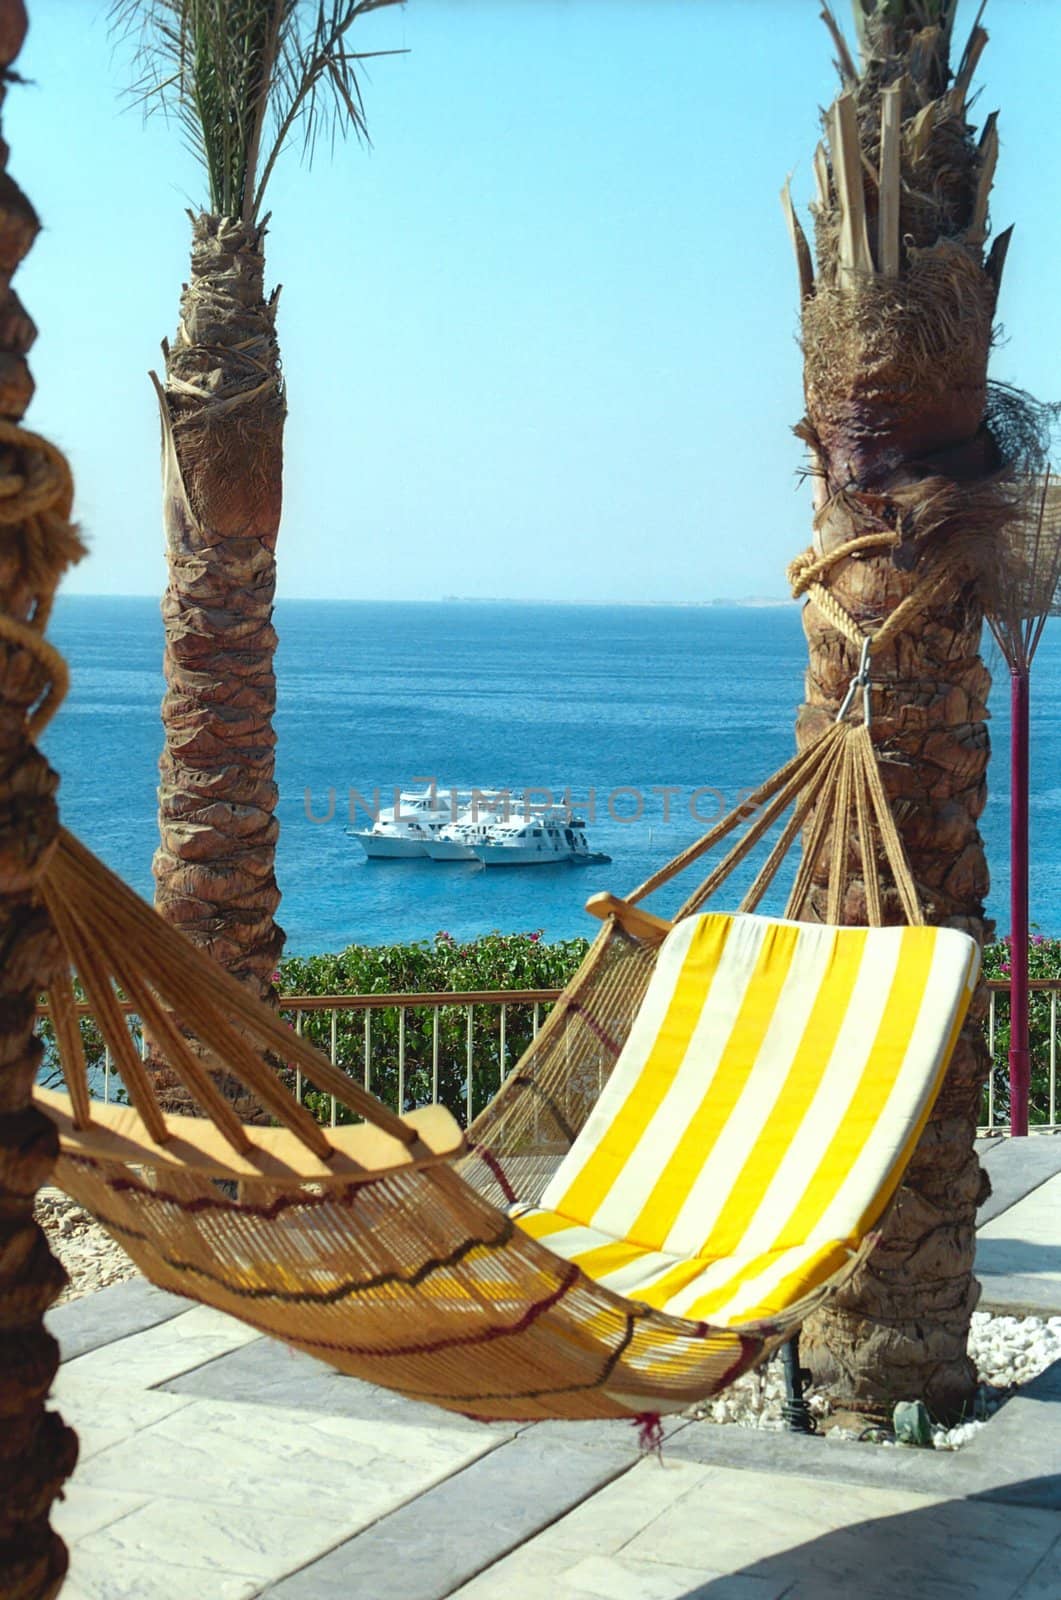 Hammock with the striped mattress against Red Sea by mulden